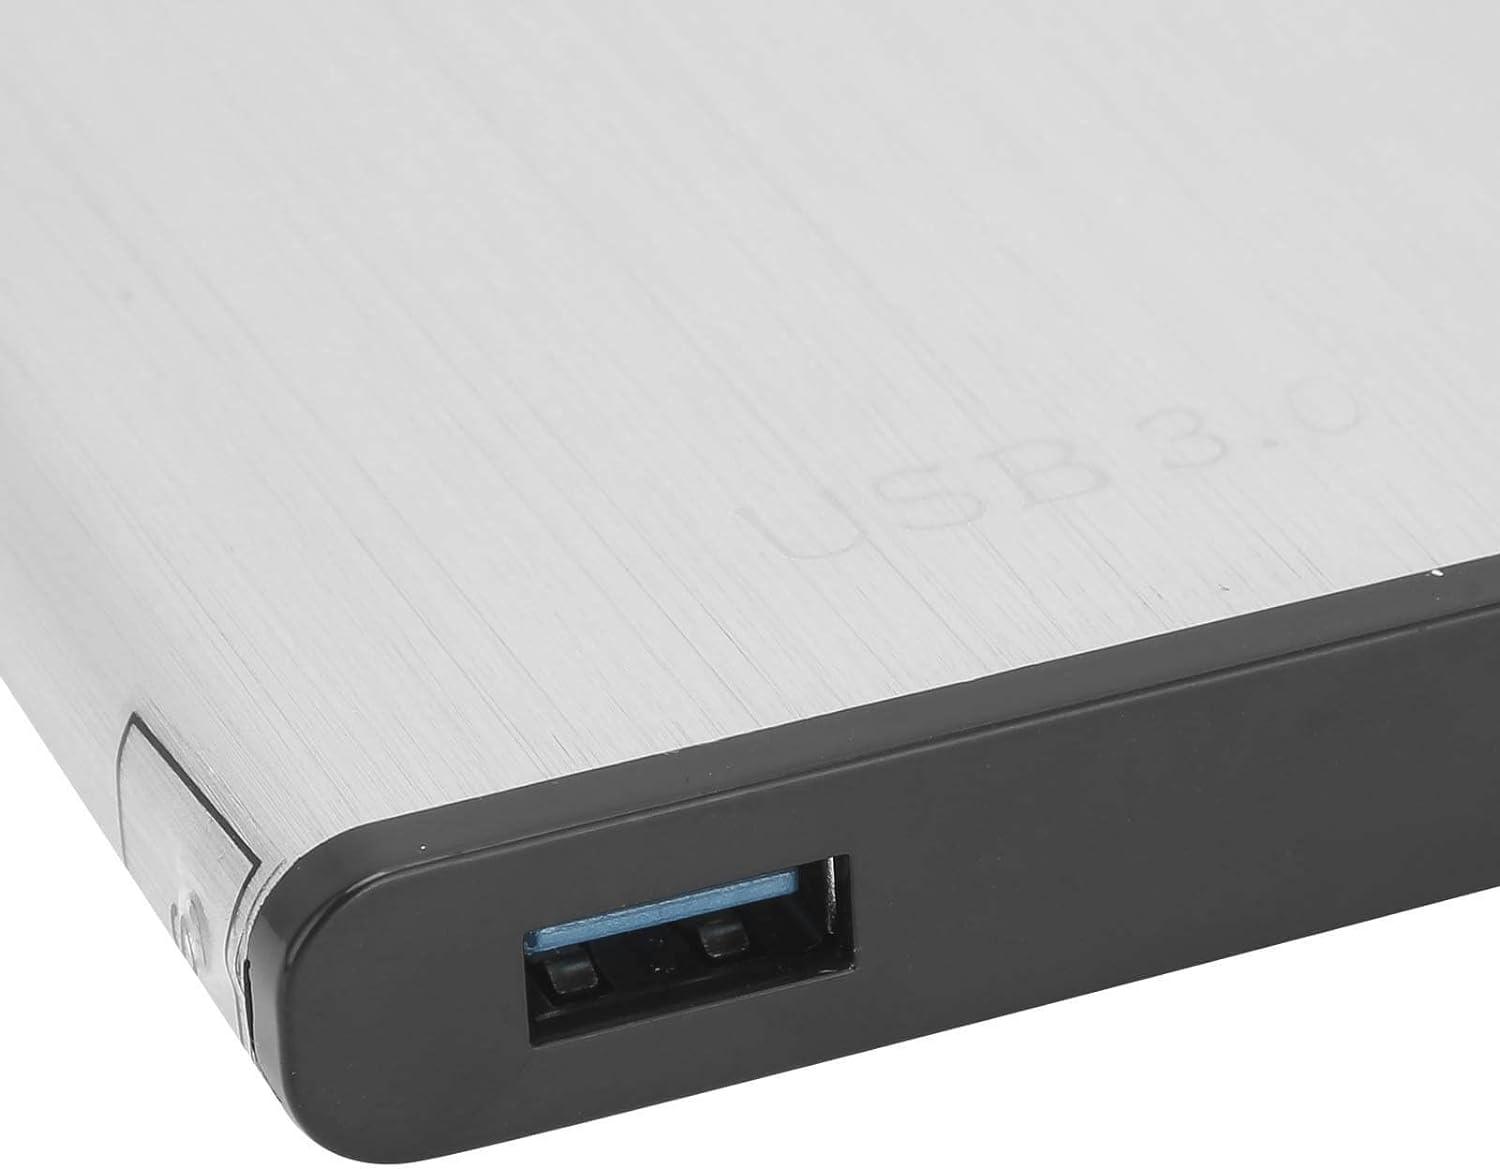 Betyble External Hard Drive -Slim 2.5'' Portable HDD USB 3.0 for